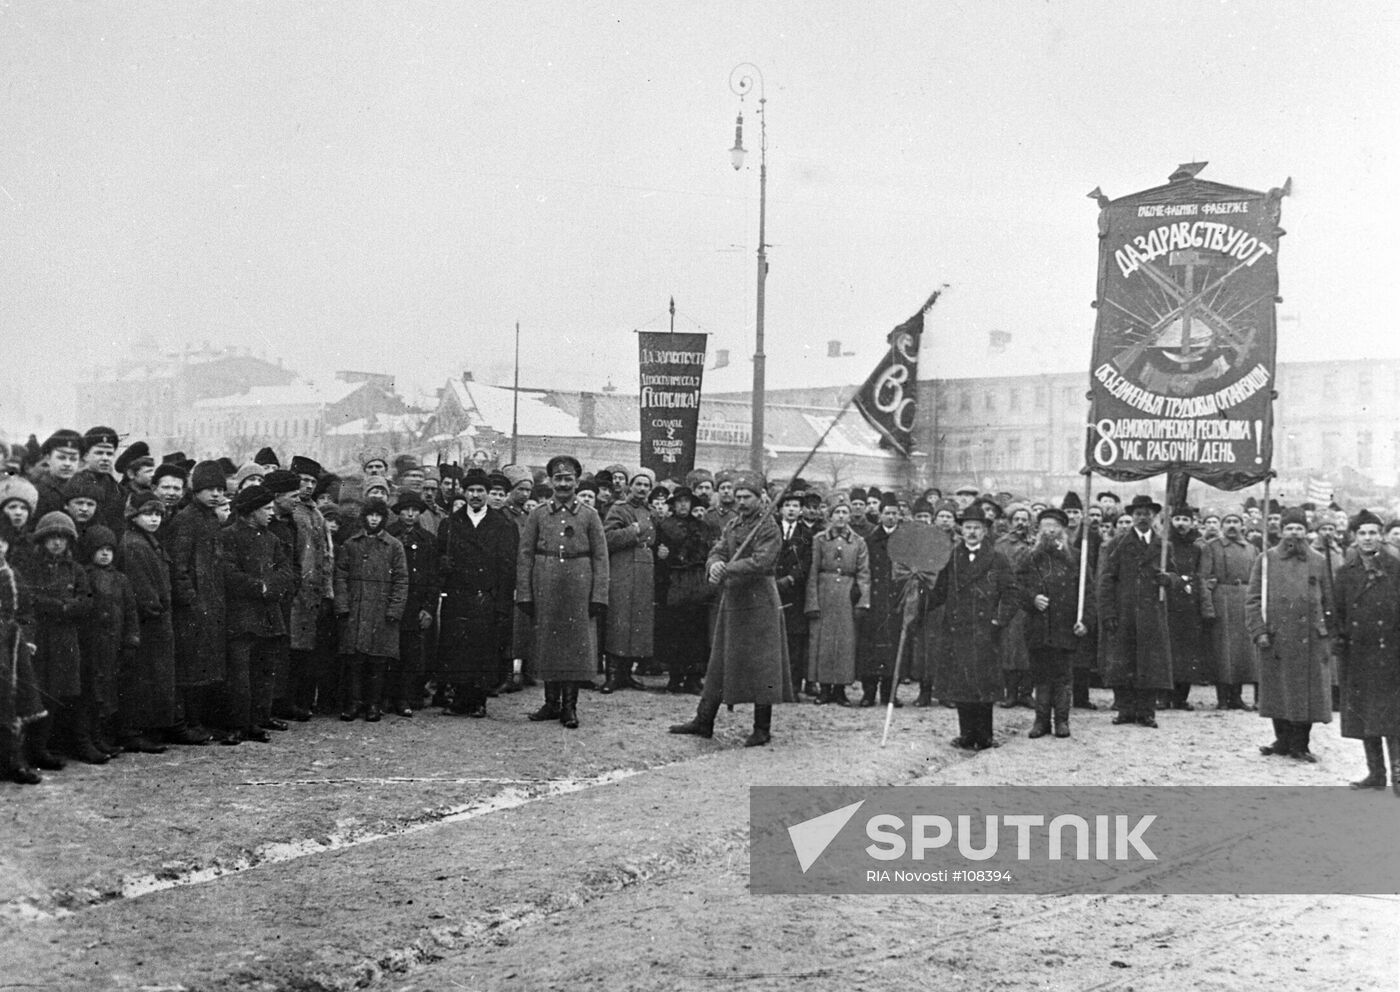 WORKERS SOLDIERS DEMONSTRATION 